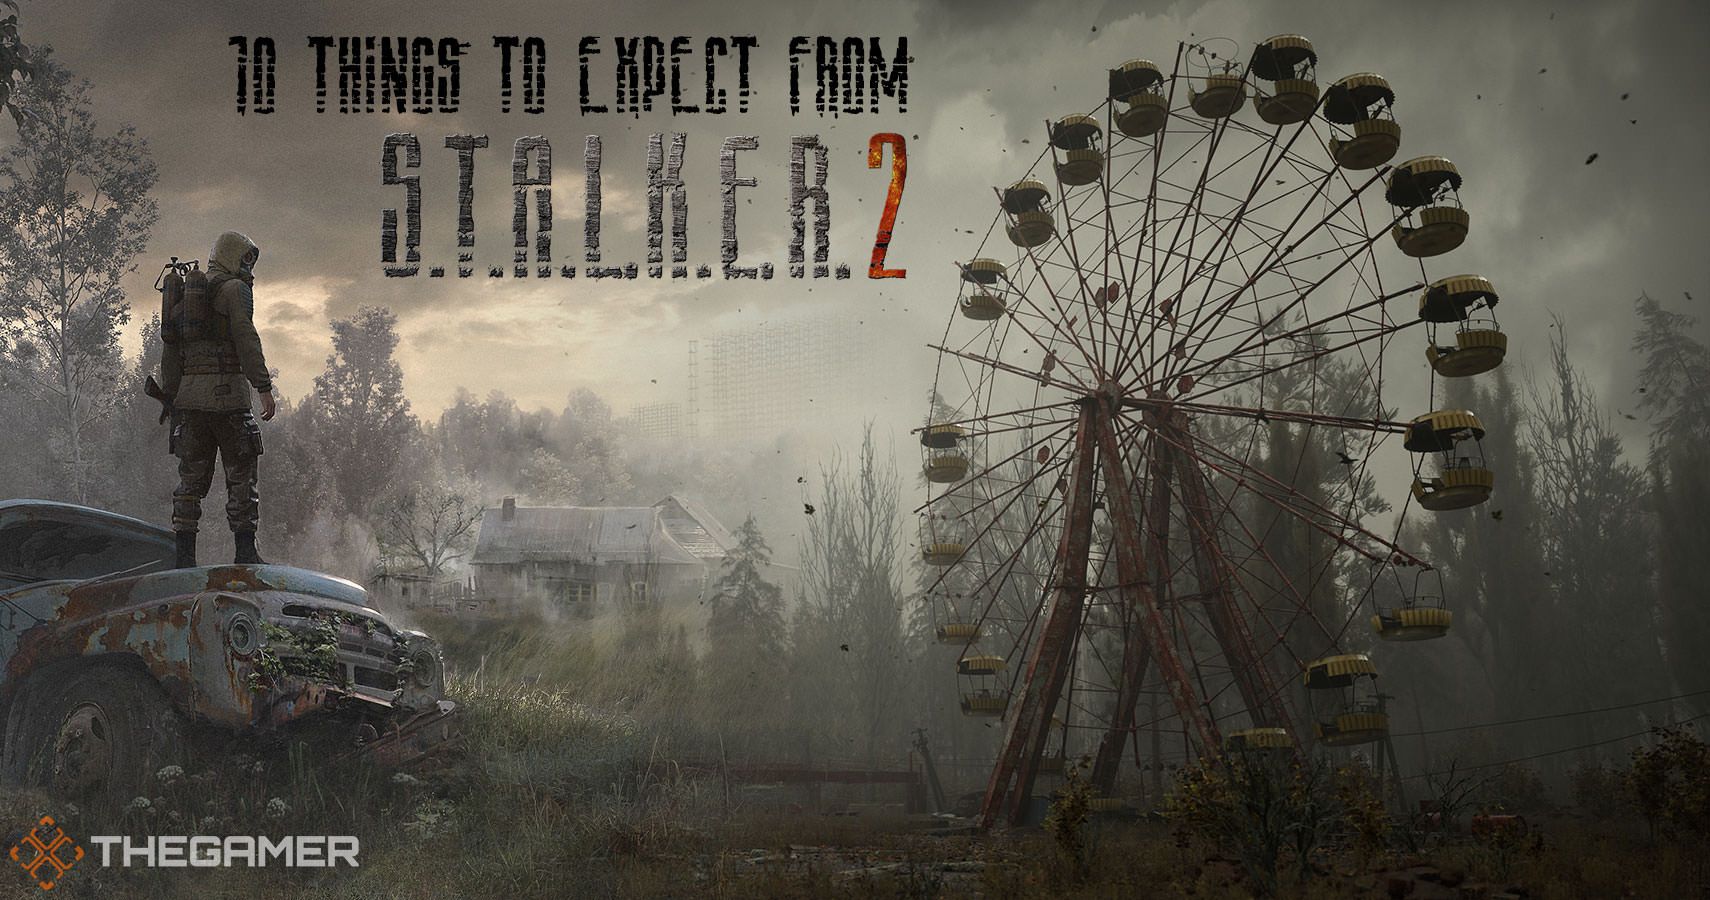 Interesting Details From Stalker 2's Come To Me Trailer